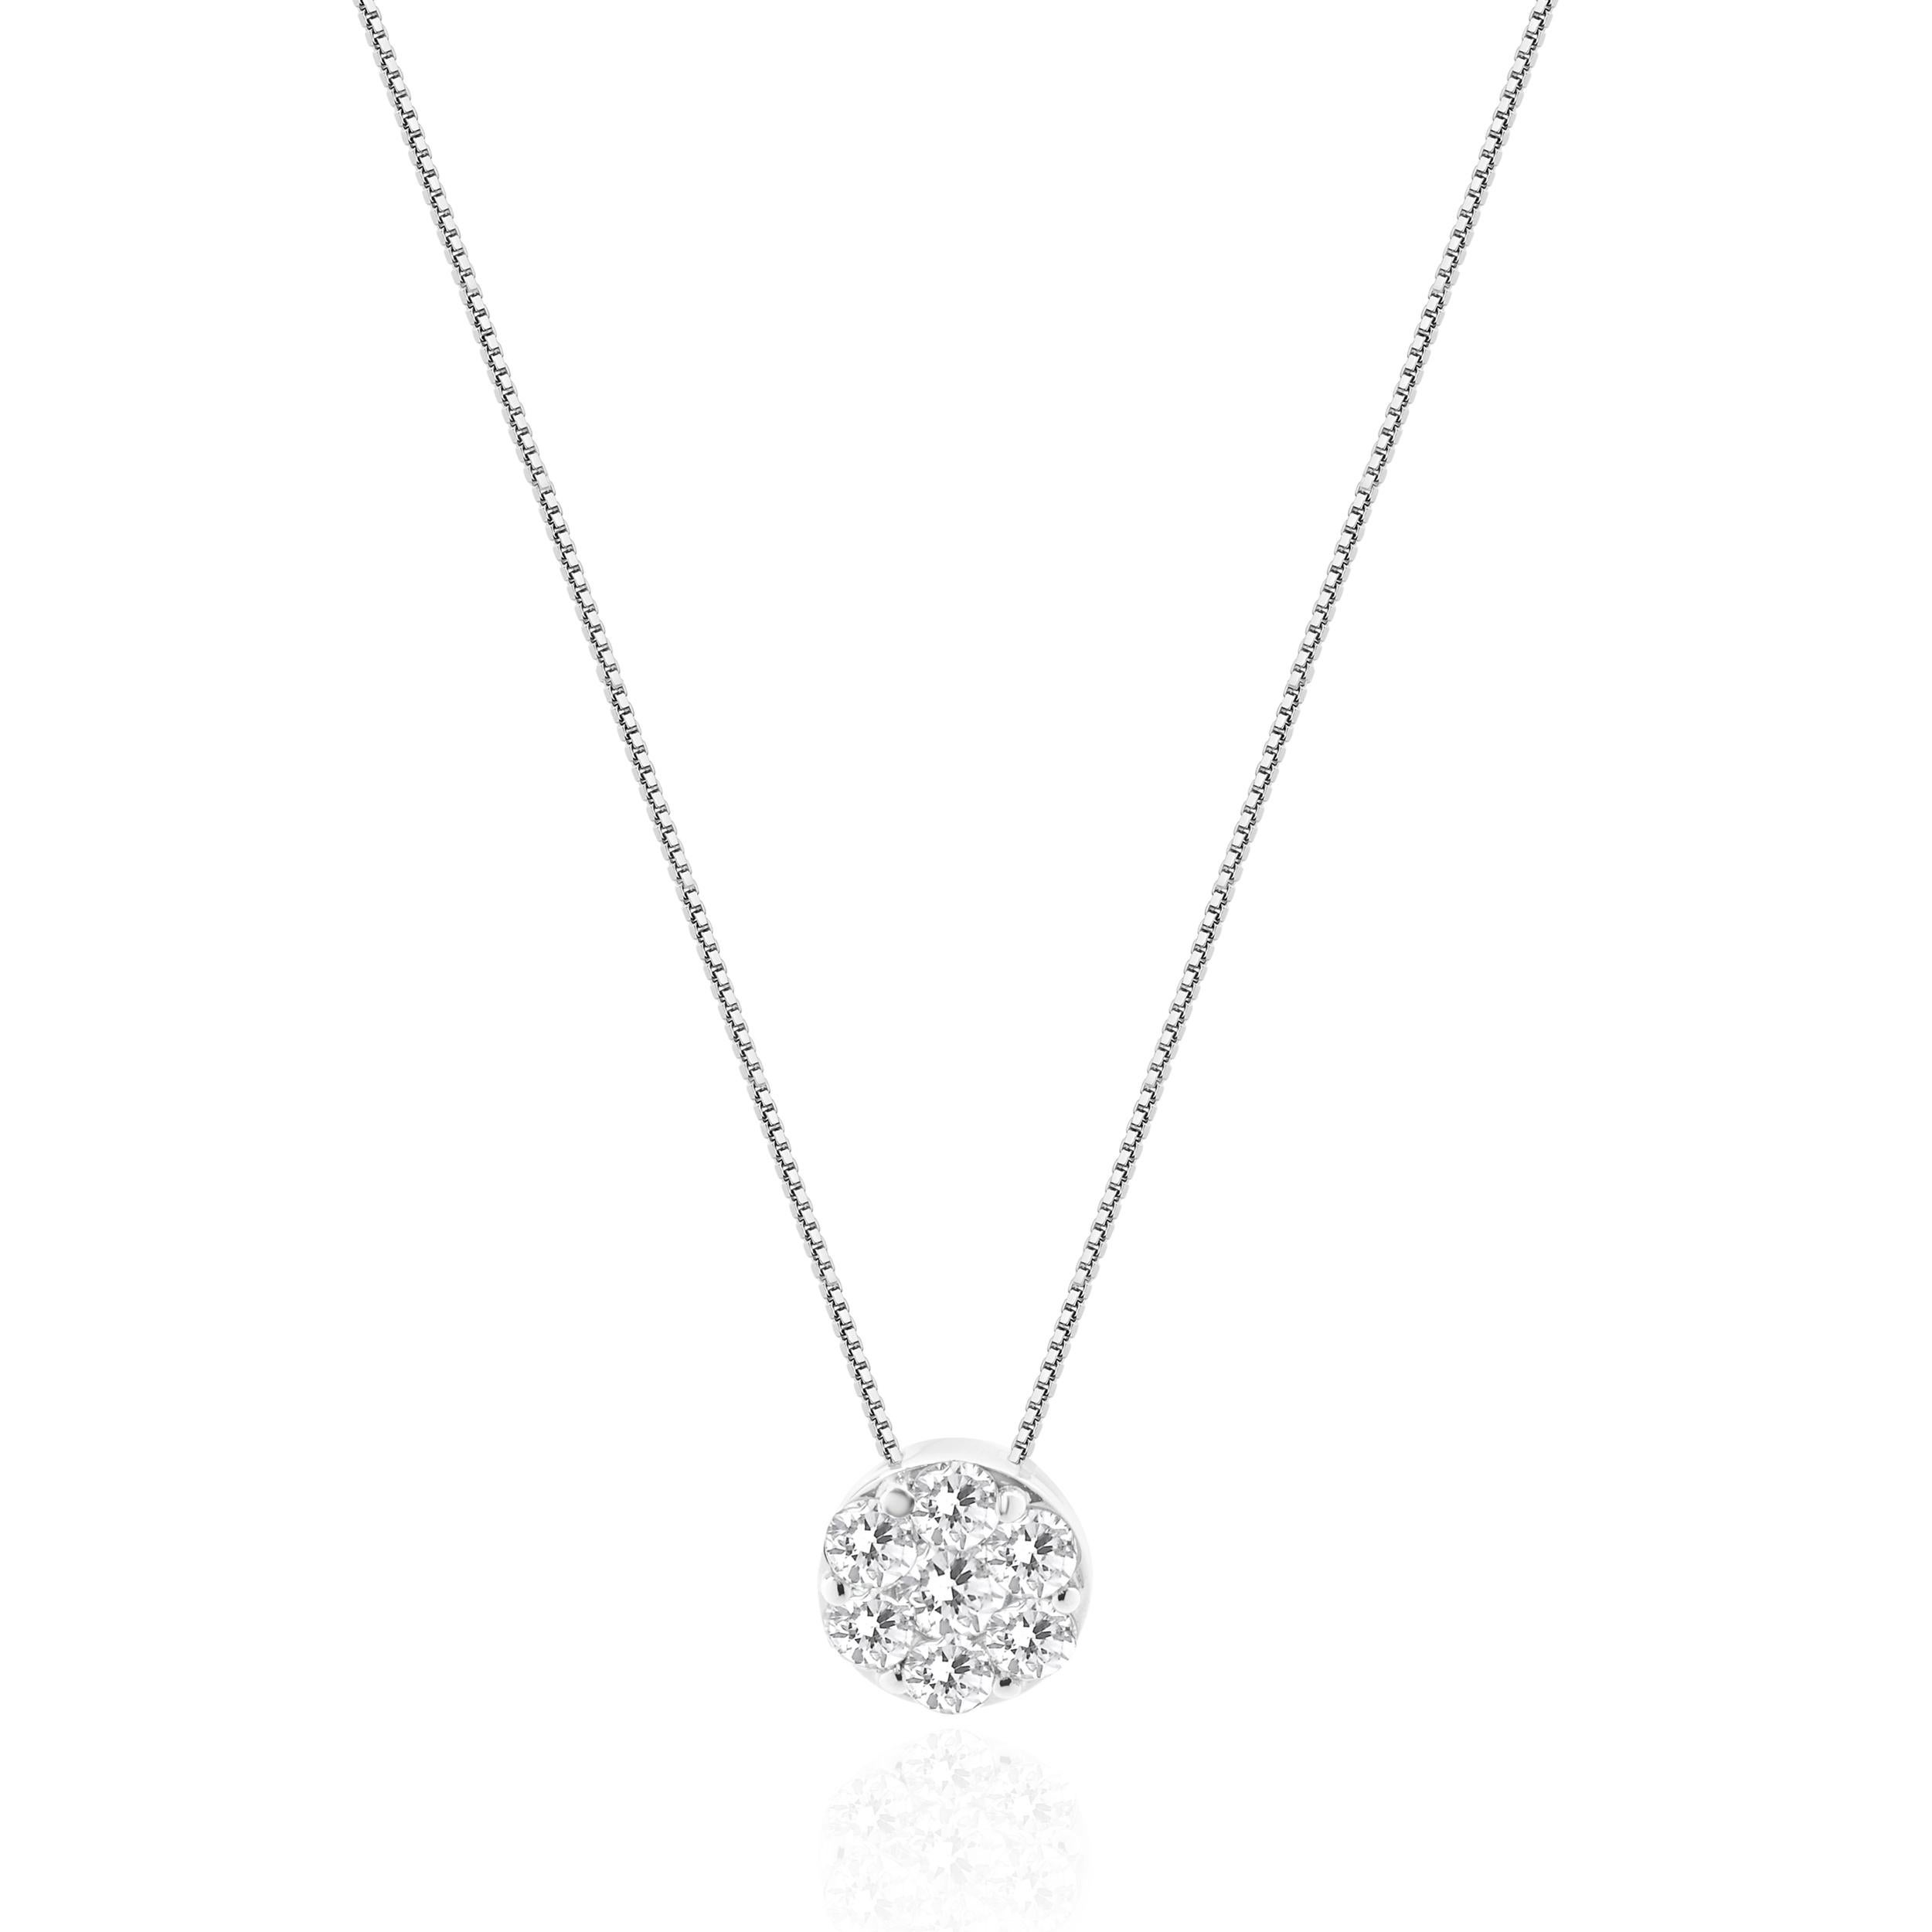 Designer: custom
Material: 14K white gold
Diamonds: 7 round brilliant cut = 0.45cttw
Color: H
Clarity: SI1
Dimensions: necklace measures 18-inches in length 
Weight: 1.61 grams
